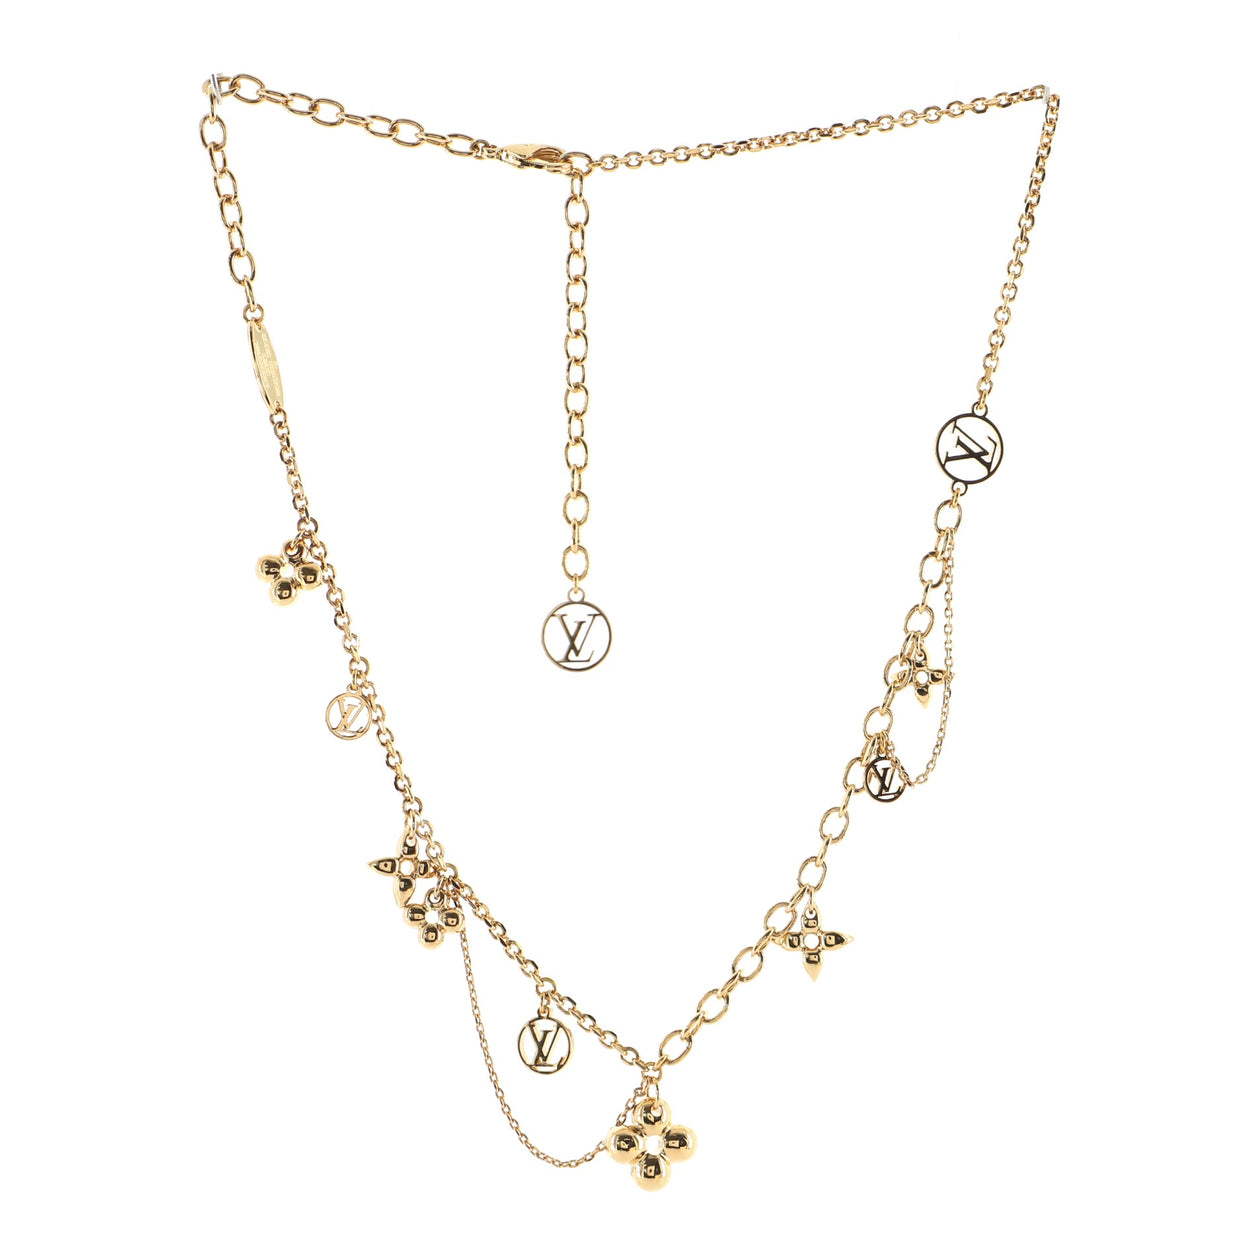 Louis Vuitton Blooming Strass Necklace (BLOOMING STRASS NECKLACE, M68374)